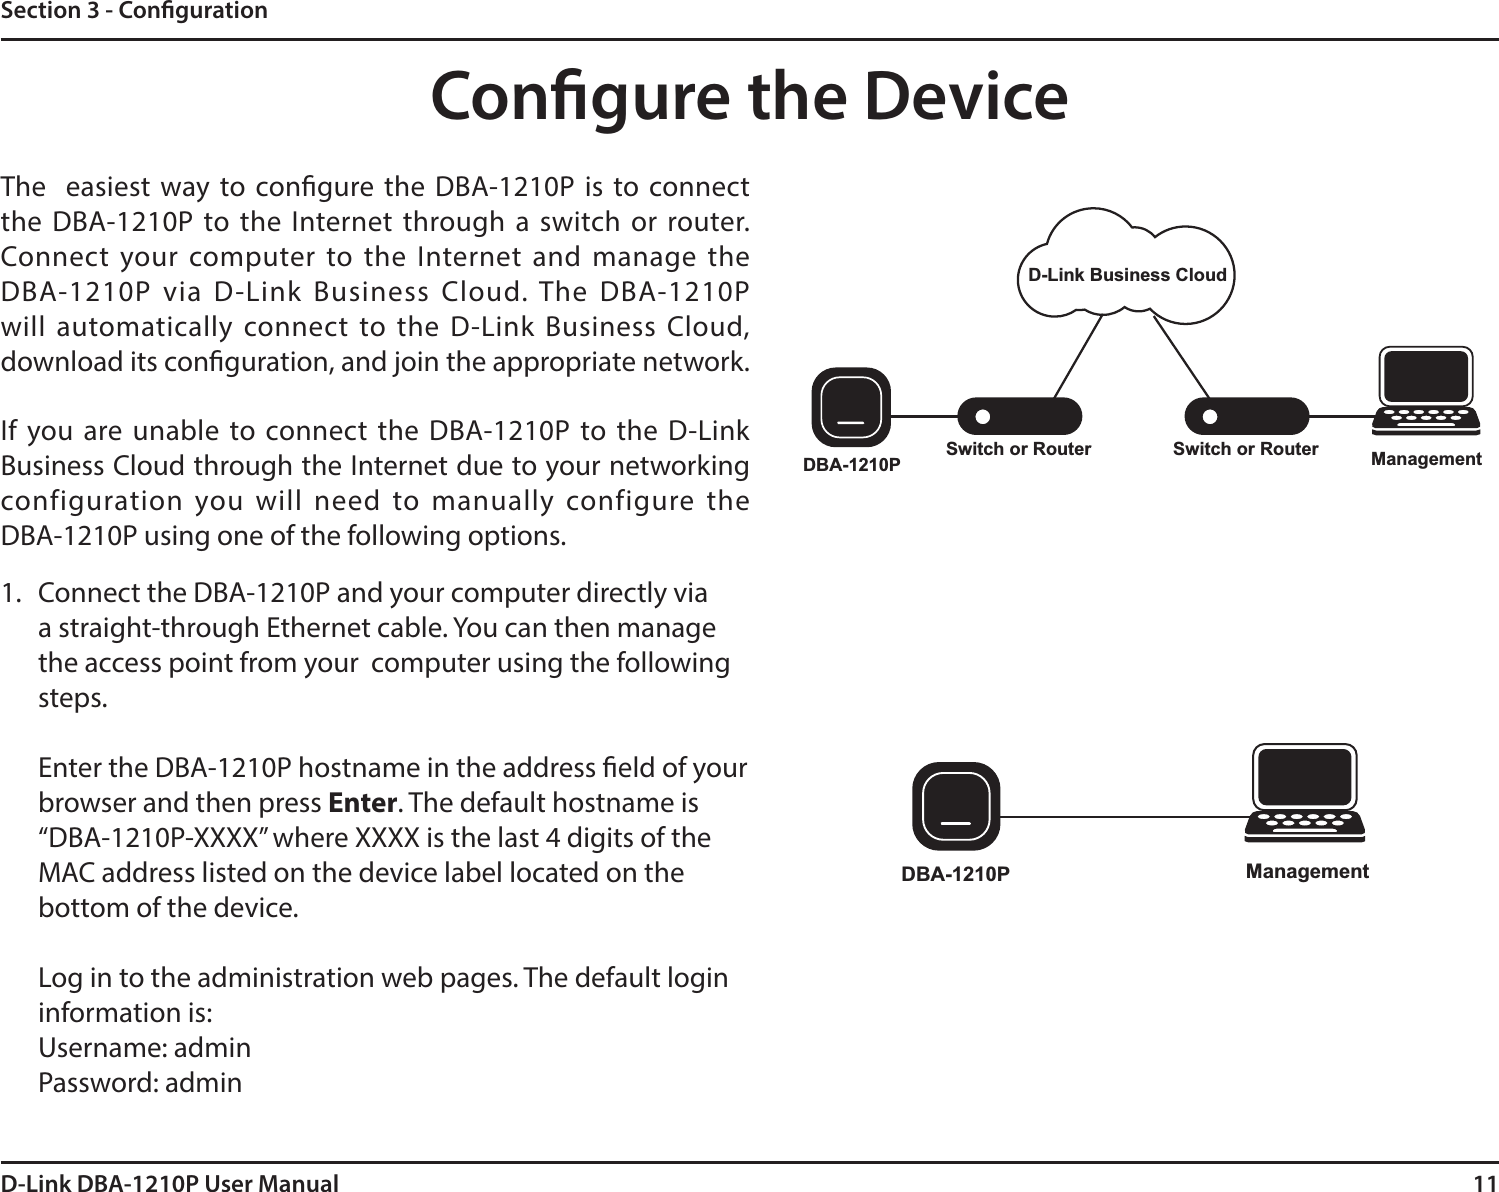 11D-Link DBA-1210P User ManualSection 3 - CongurationThe   easiest way to congure  the  DBA-1210P  is  to connect the  DBA-1210P  to the Internet through  a  switch  or  router. Connect  your  computer  to  the  Internet  and  manage  the DBA-1210P  via  D-Link  Business  Cloud.  The  DBA-1210P will  automatically  connect  to  the  D-Link  Business  Cloud, download its conguration, and join the appropriate network.If  you  are  unable  to  connect  the  DBA-1210P  to  the  D-Link Business Cloud through the Internet due to your networking configuration  you  will  need  to  manually  configure  the DBA-1210P using one of the following options.Congure the DeviceSwitch or RouterSwitch or Router ManagementDBA-1210PD-Link Business CloudDBA-1210P Management1. Connect the DBA-1210P and your computer directly via a straight-through Ethernet cable. You can then manage the access point from your  computer using the following steps.Enter the DBA-1210P hostname in the address eld of your browser and then press Enter. The default hostname is “DBA-1210P-XXXX” where XXXX is the last 4 digits of the MAC address listed on the device label located on the bottom of the device.Log in to the administration web pages. The default login information is:Username: adminPassword: admin